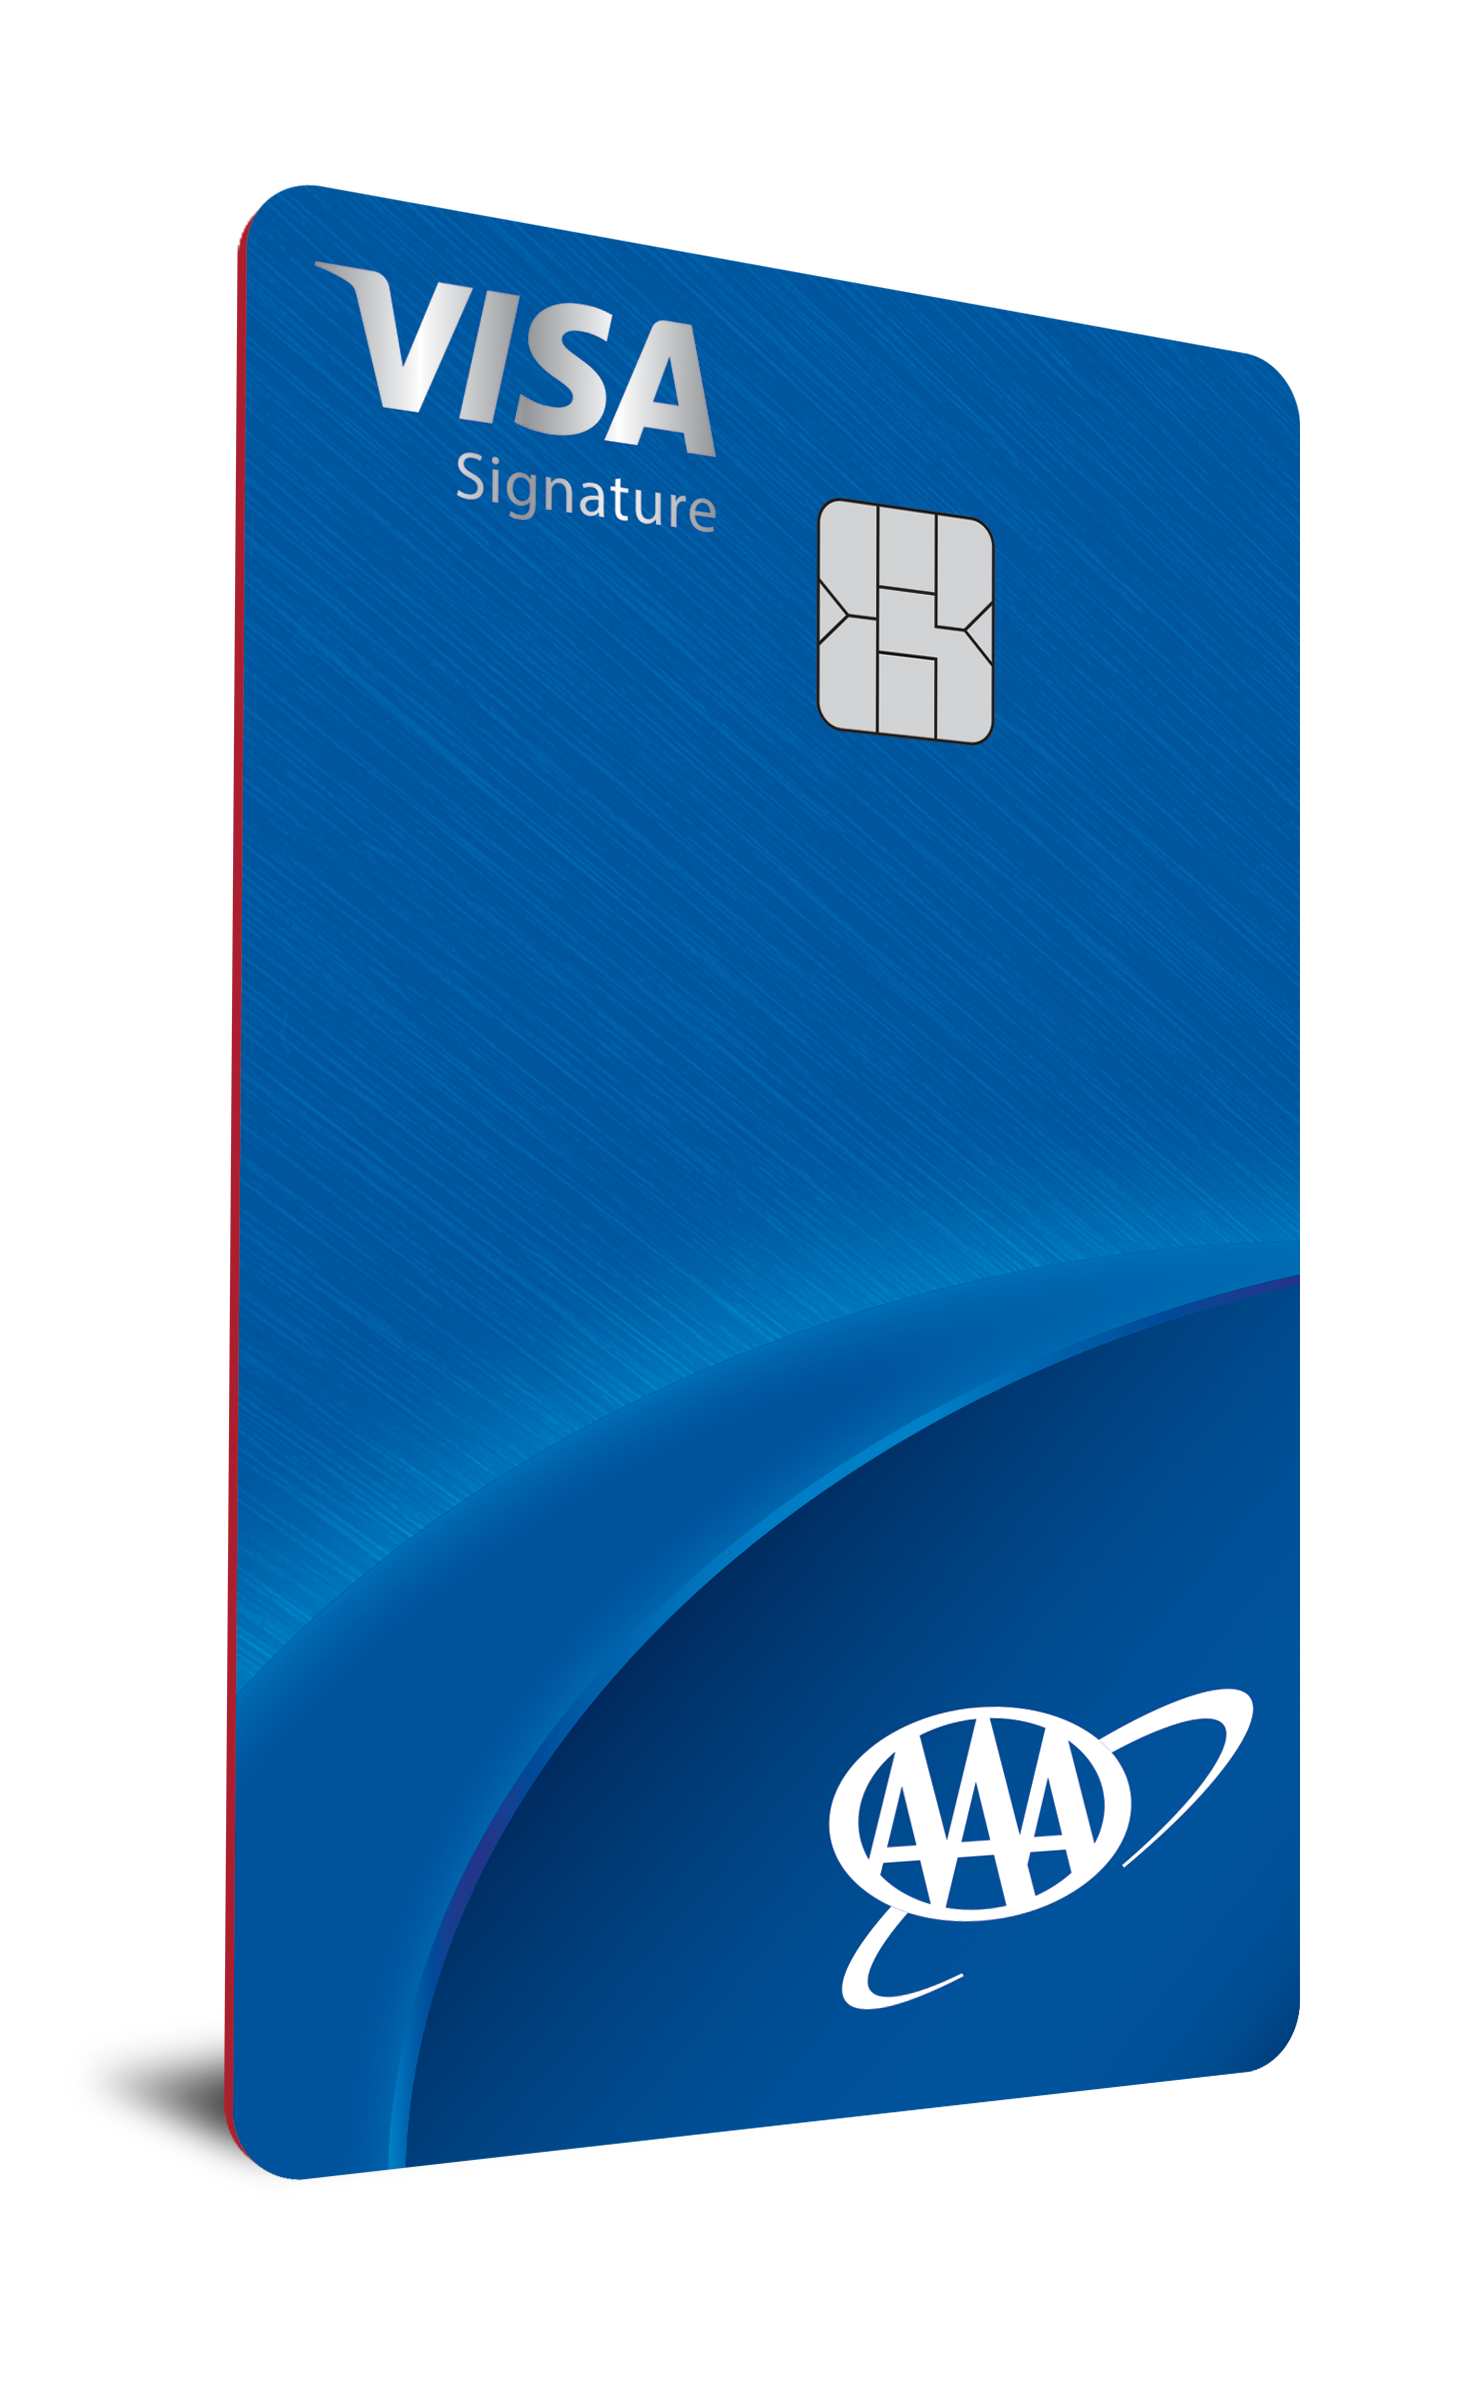 How To Redeem Aaa Credit Card Rewards